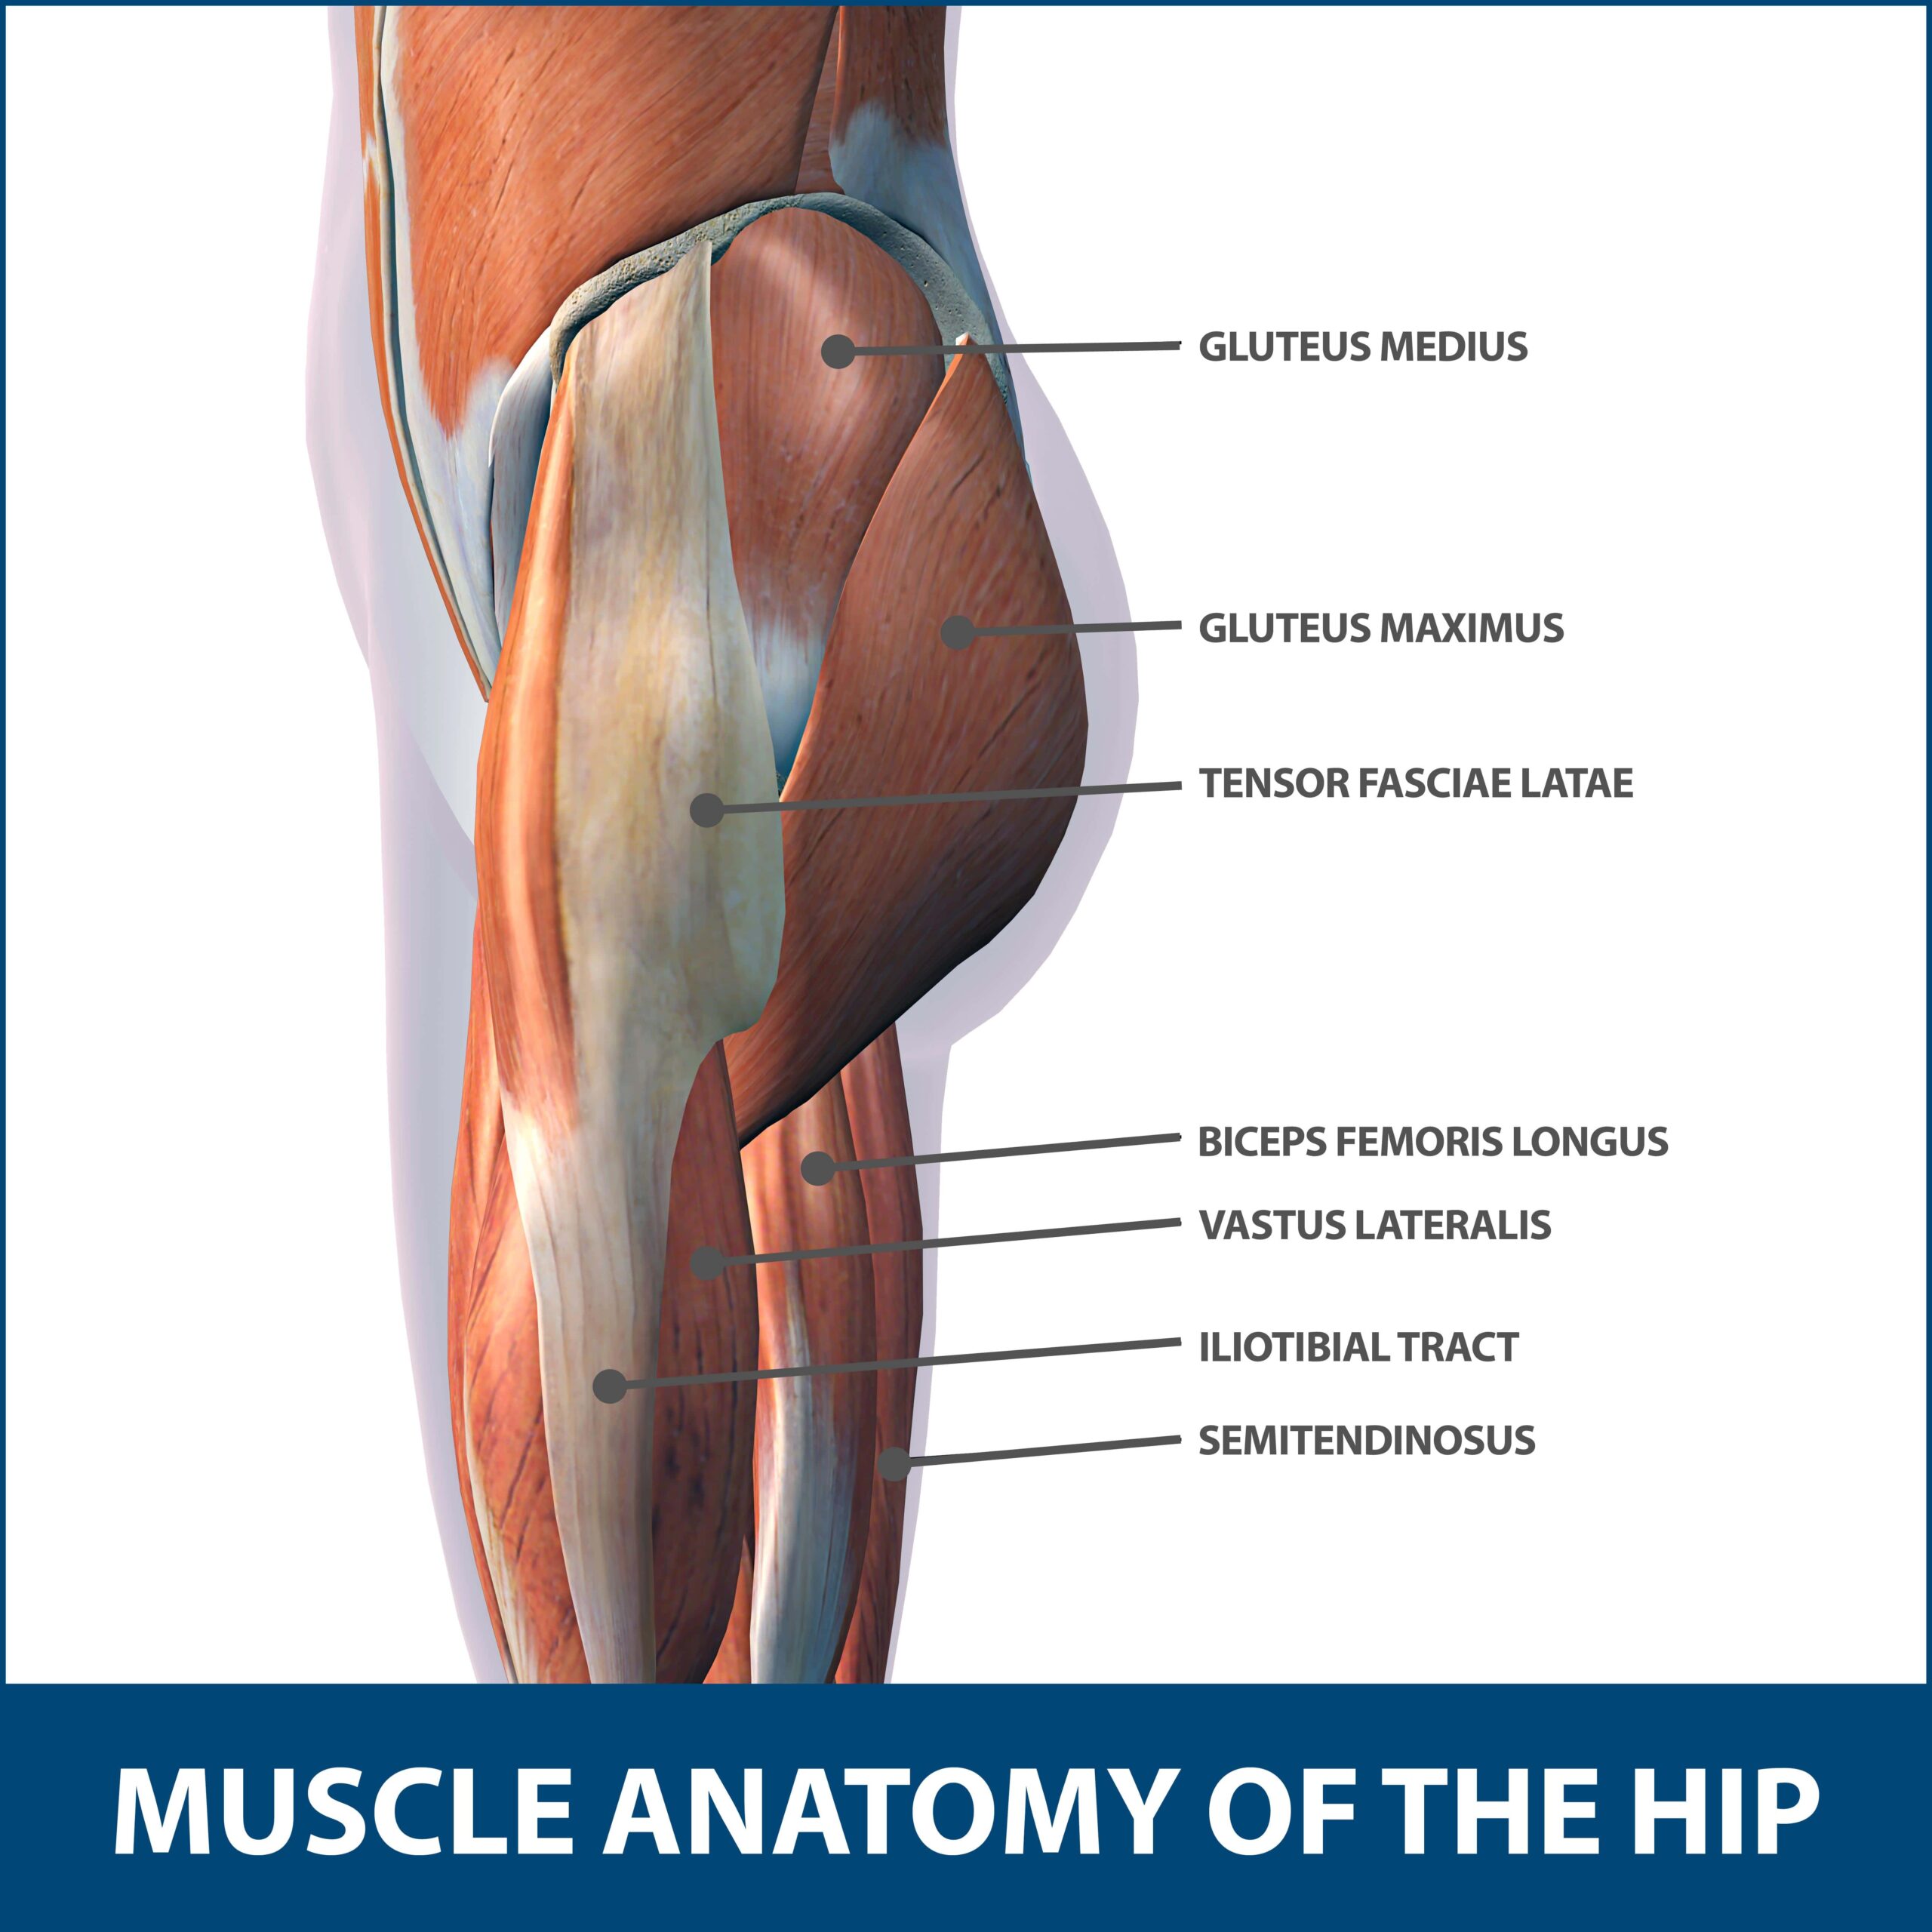 Normal anatomy of the lateral hip region. The gluteus medius